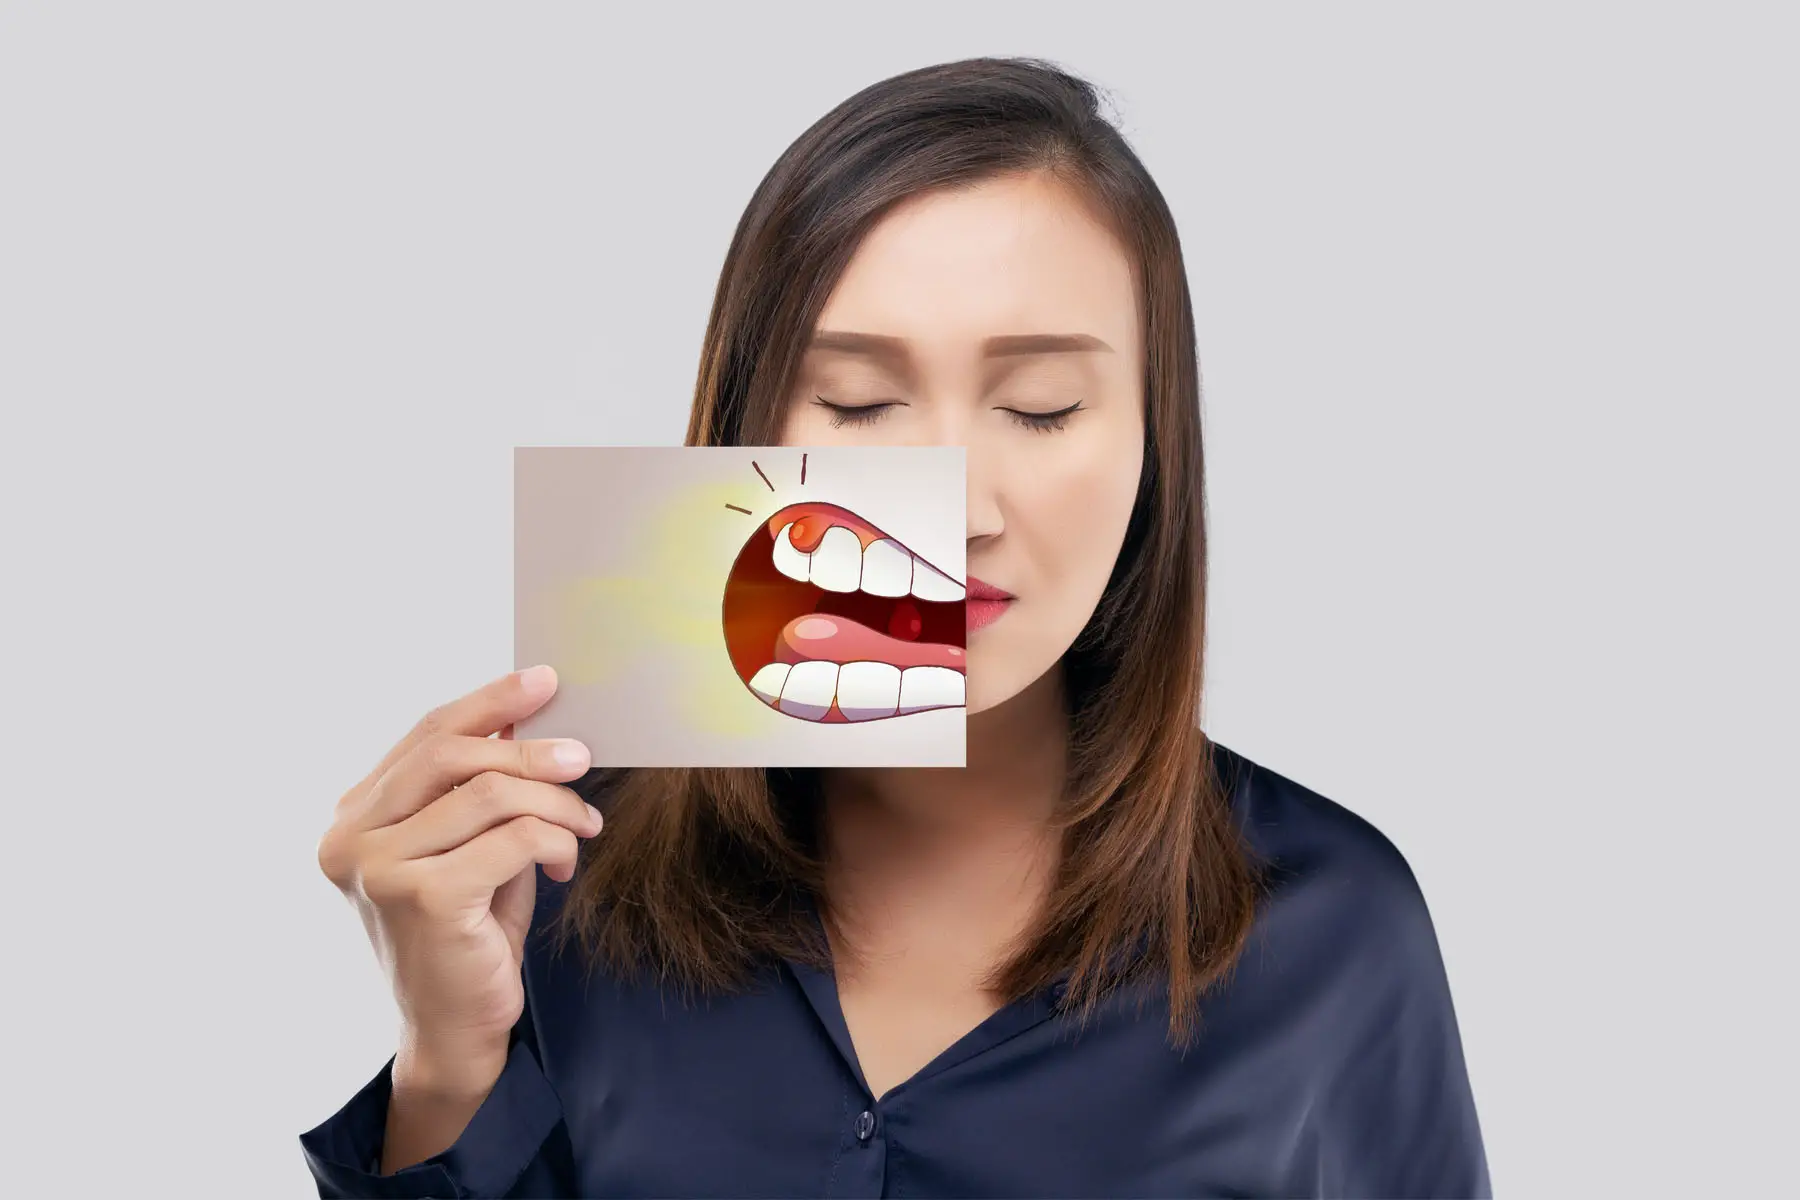 Luxembourg dentists: a woman suffering a toothache and gum inflammation 